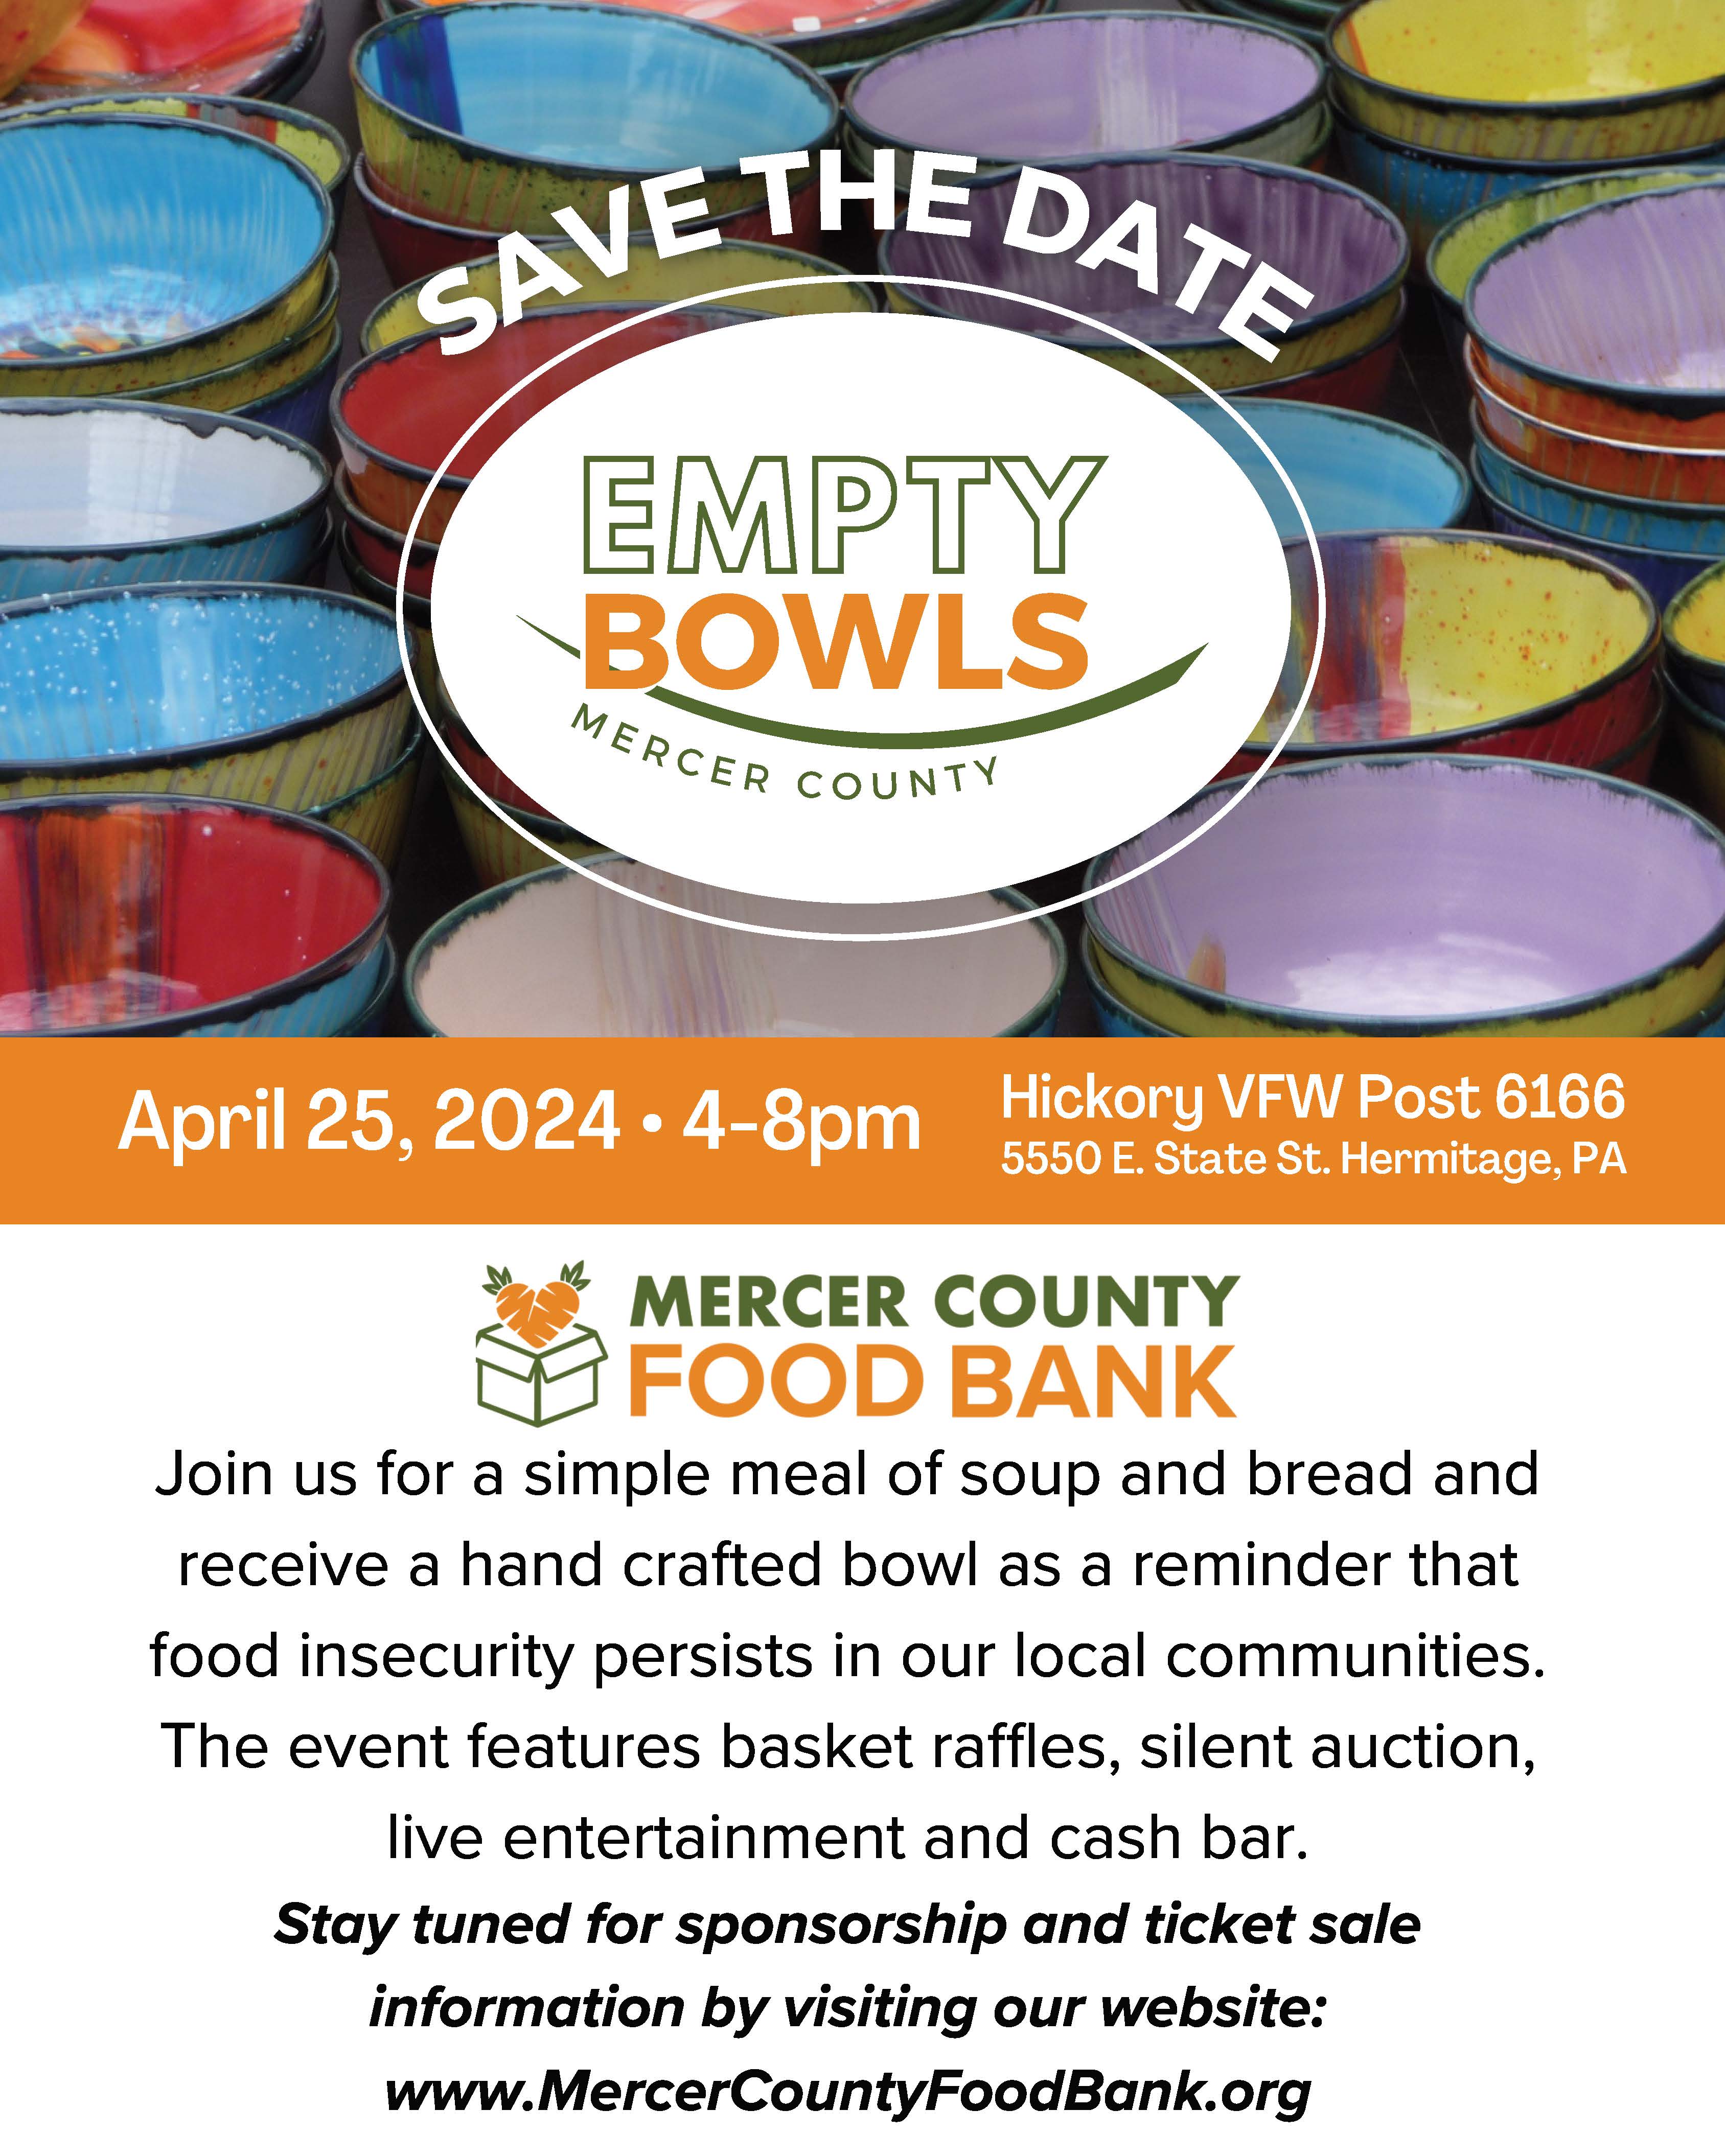 Empty Bowls Event Flyer
